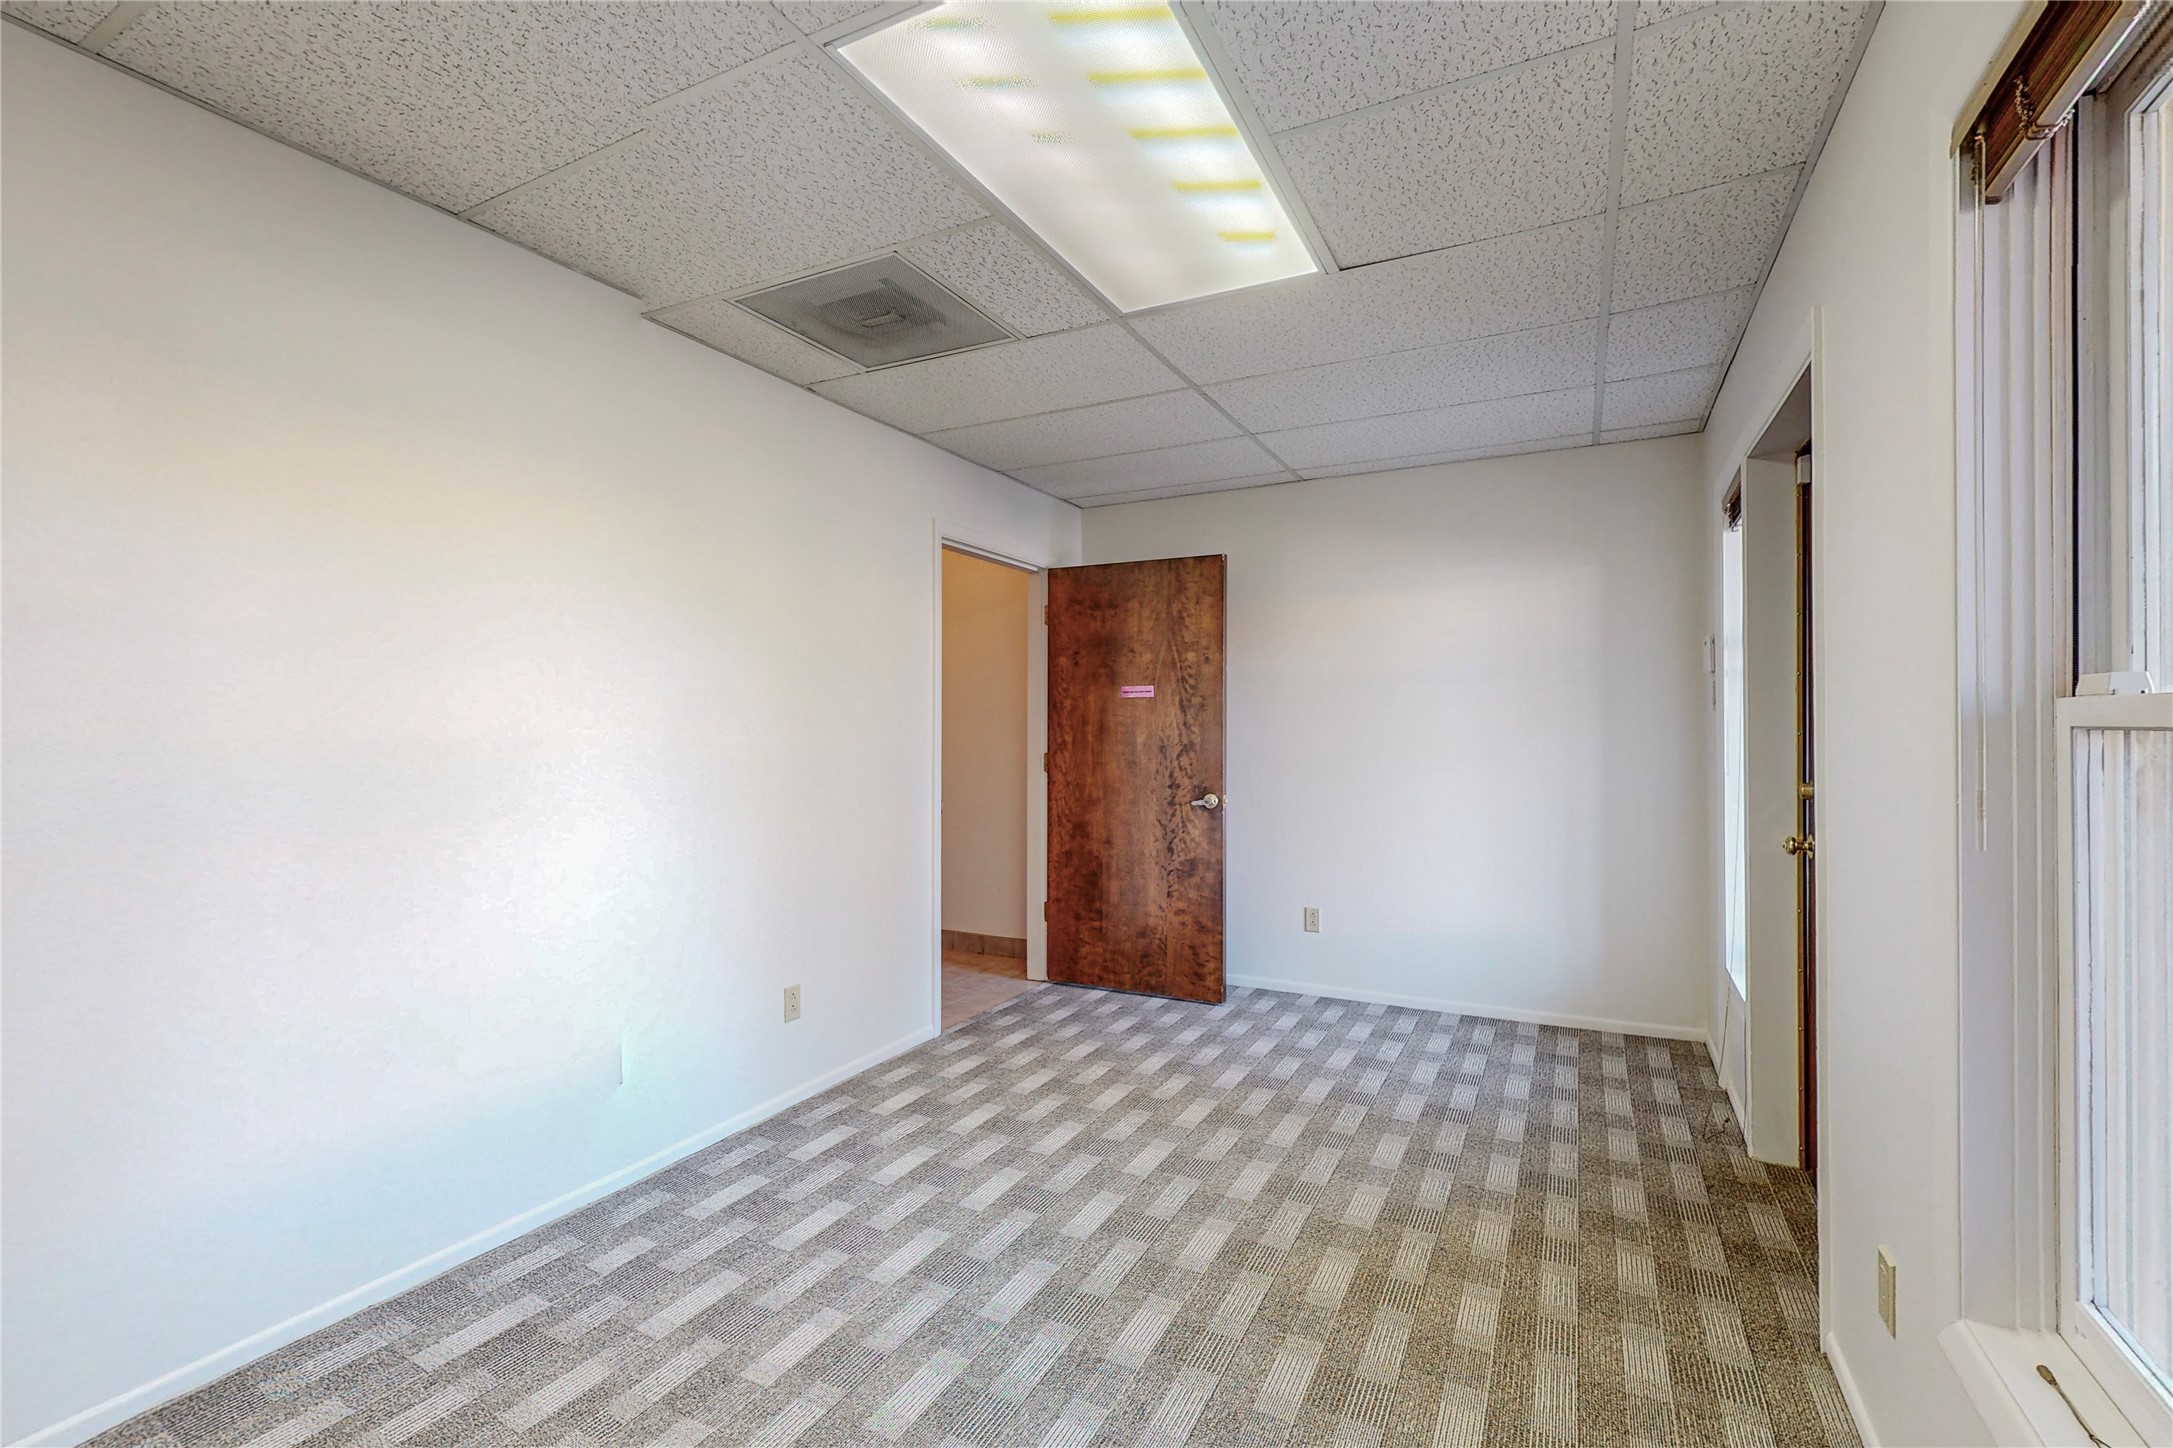 1421 Luisa Street Q, Santa Fe, New Mexico 87505, ,Commercial Lease,For Rent,1421 Luisa Street Q,202341915